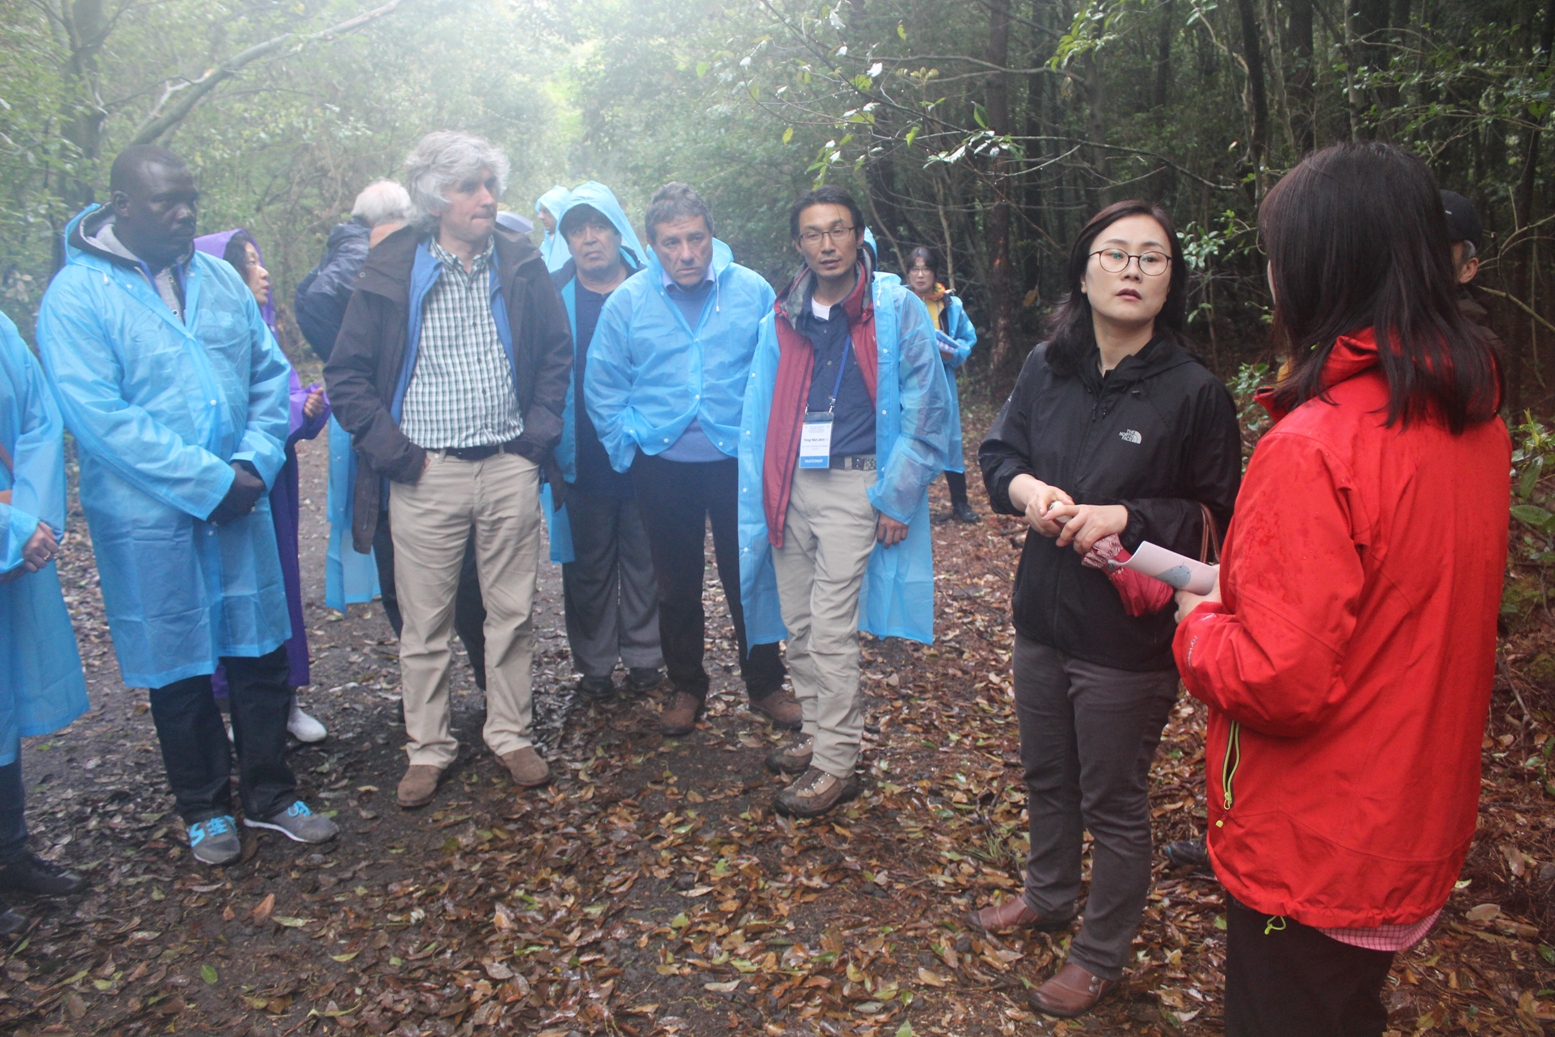 Workshop participants during a visit to “Dongbaeckdongsan (Camellia Hill)” guided by a member of the local community